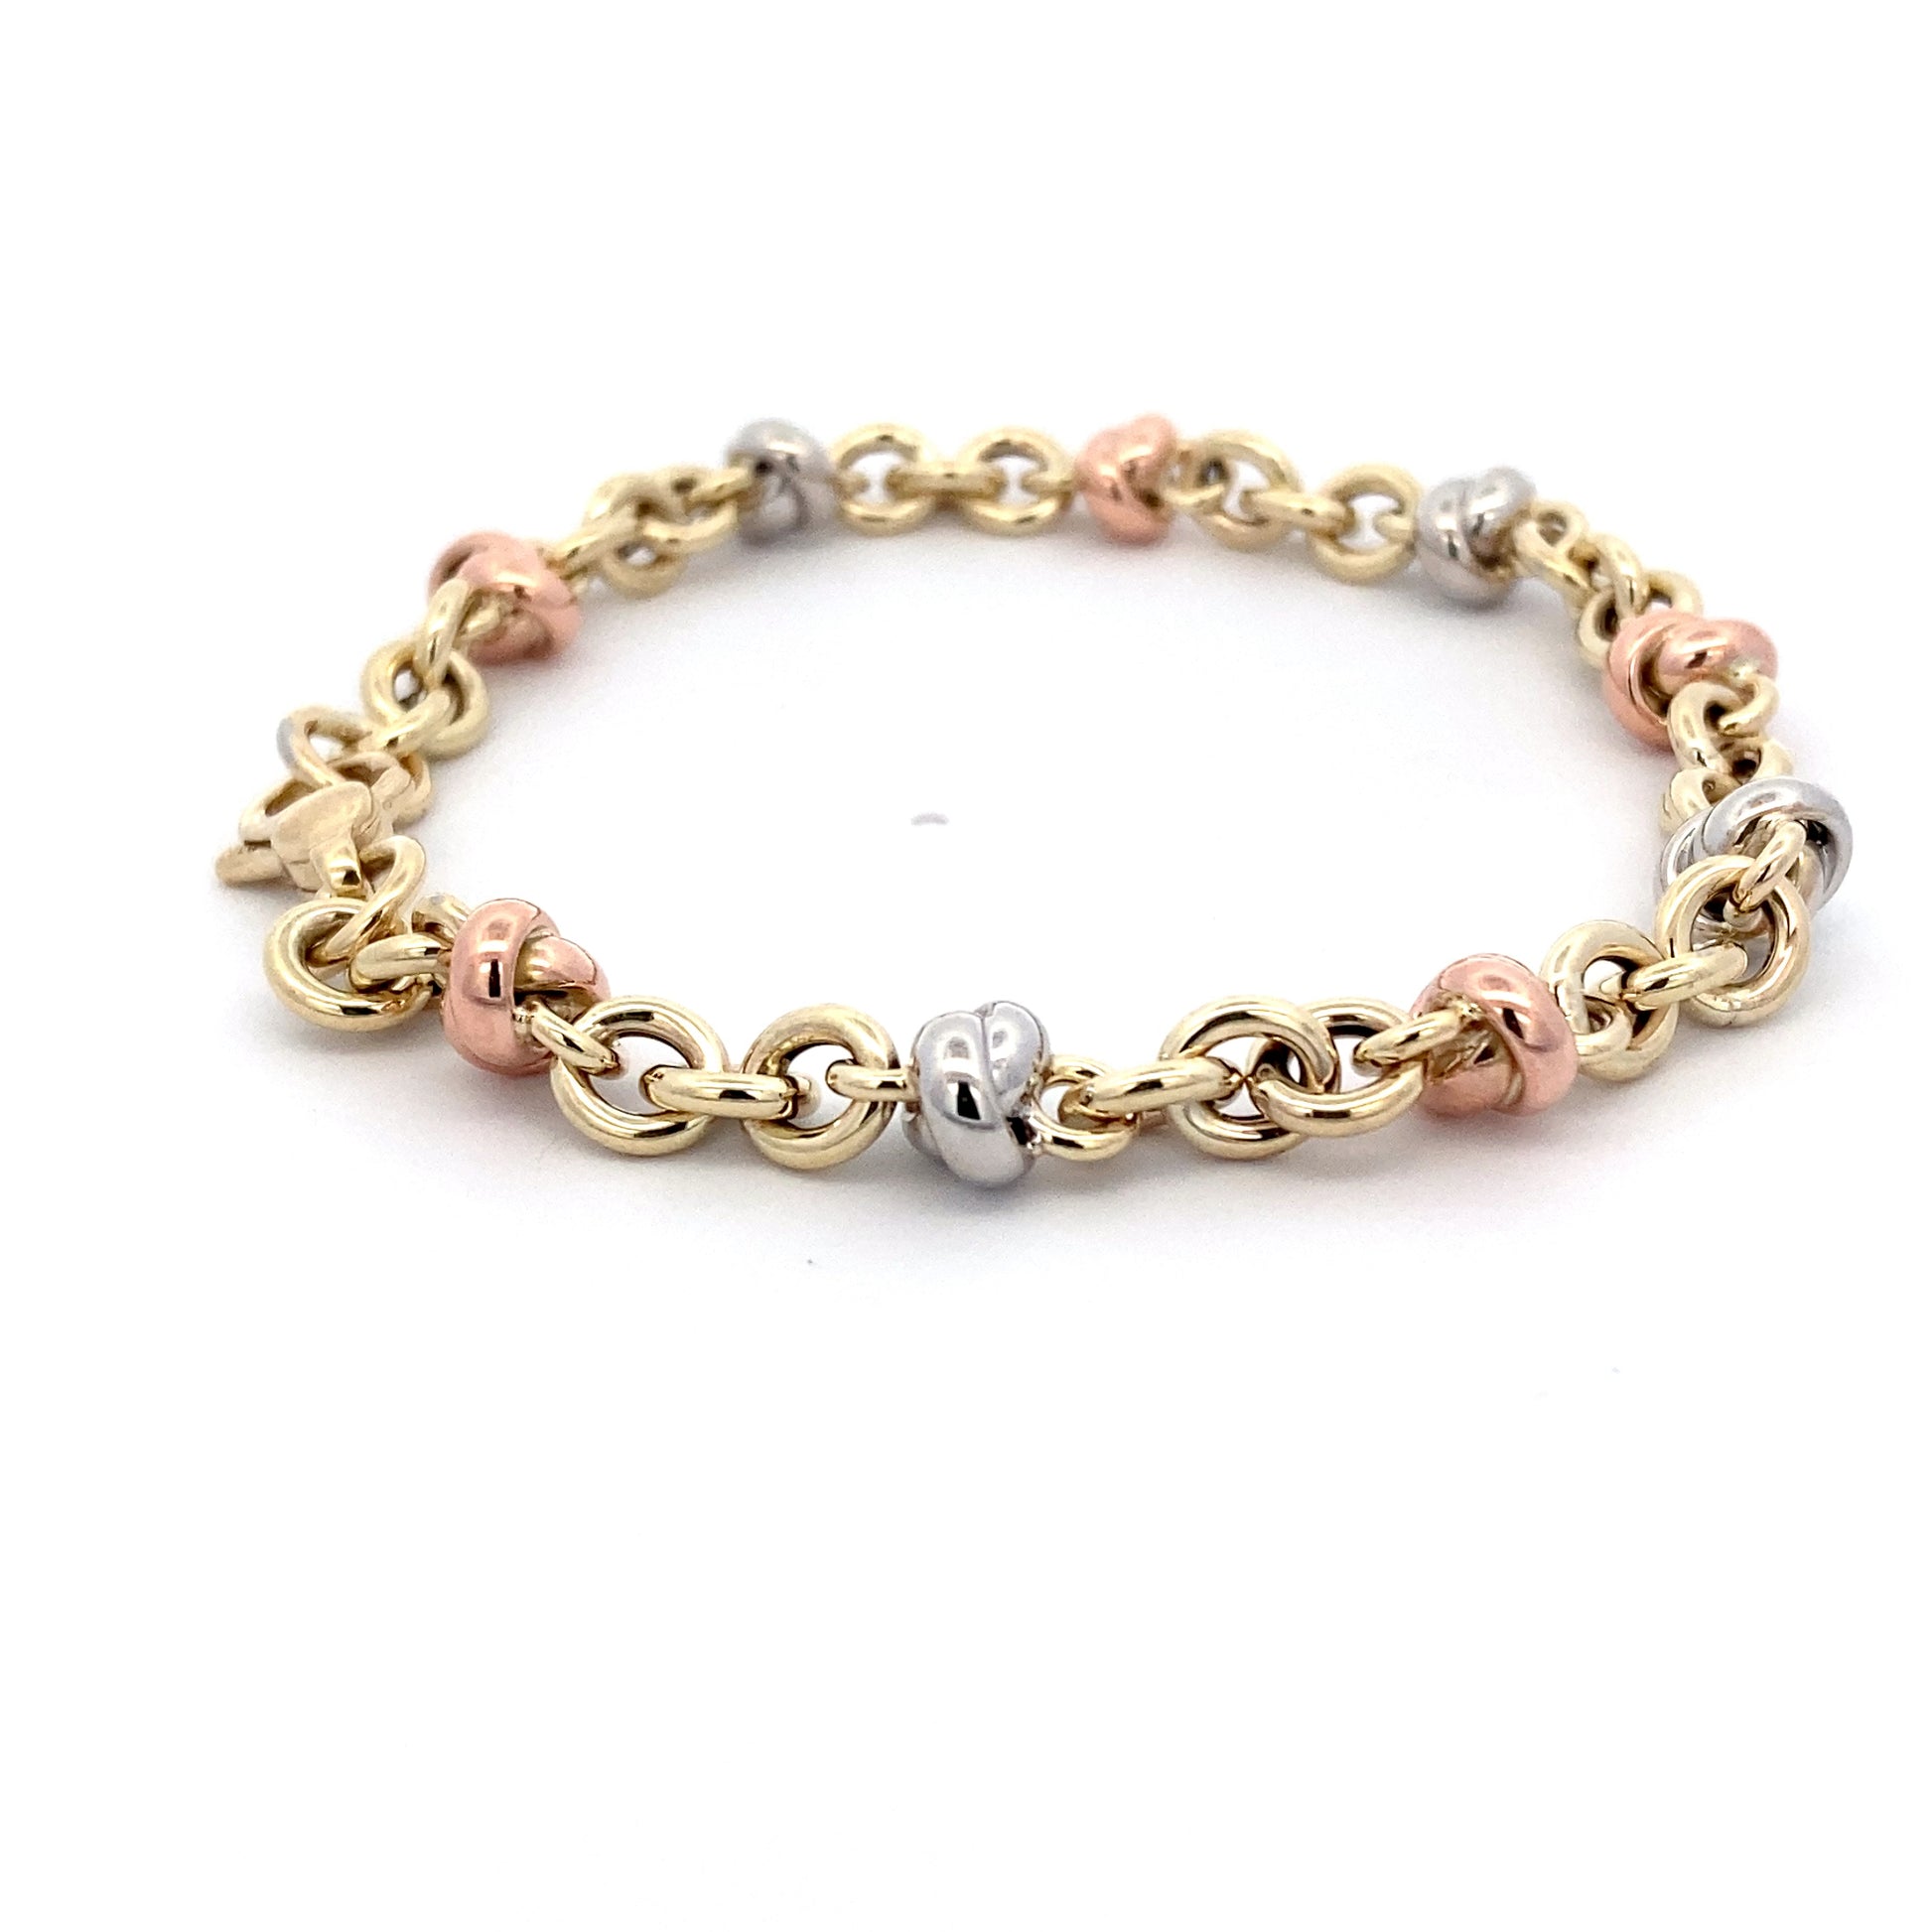 Yellow, Rose and White Gold Knot Style Bracelet  Gardiner Brothers   